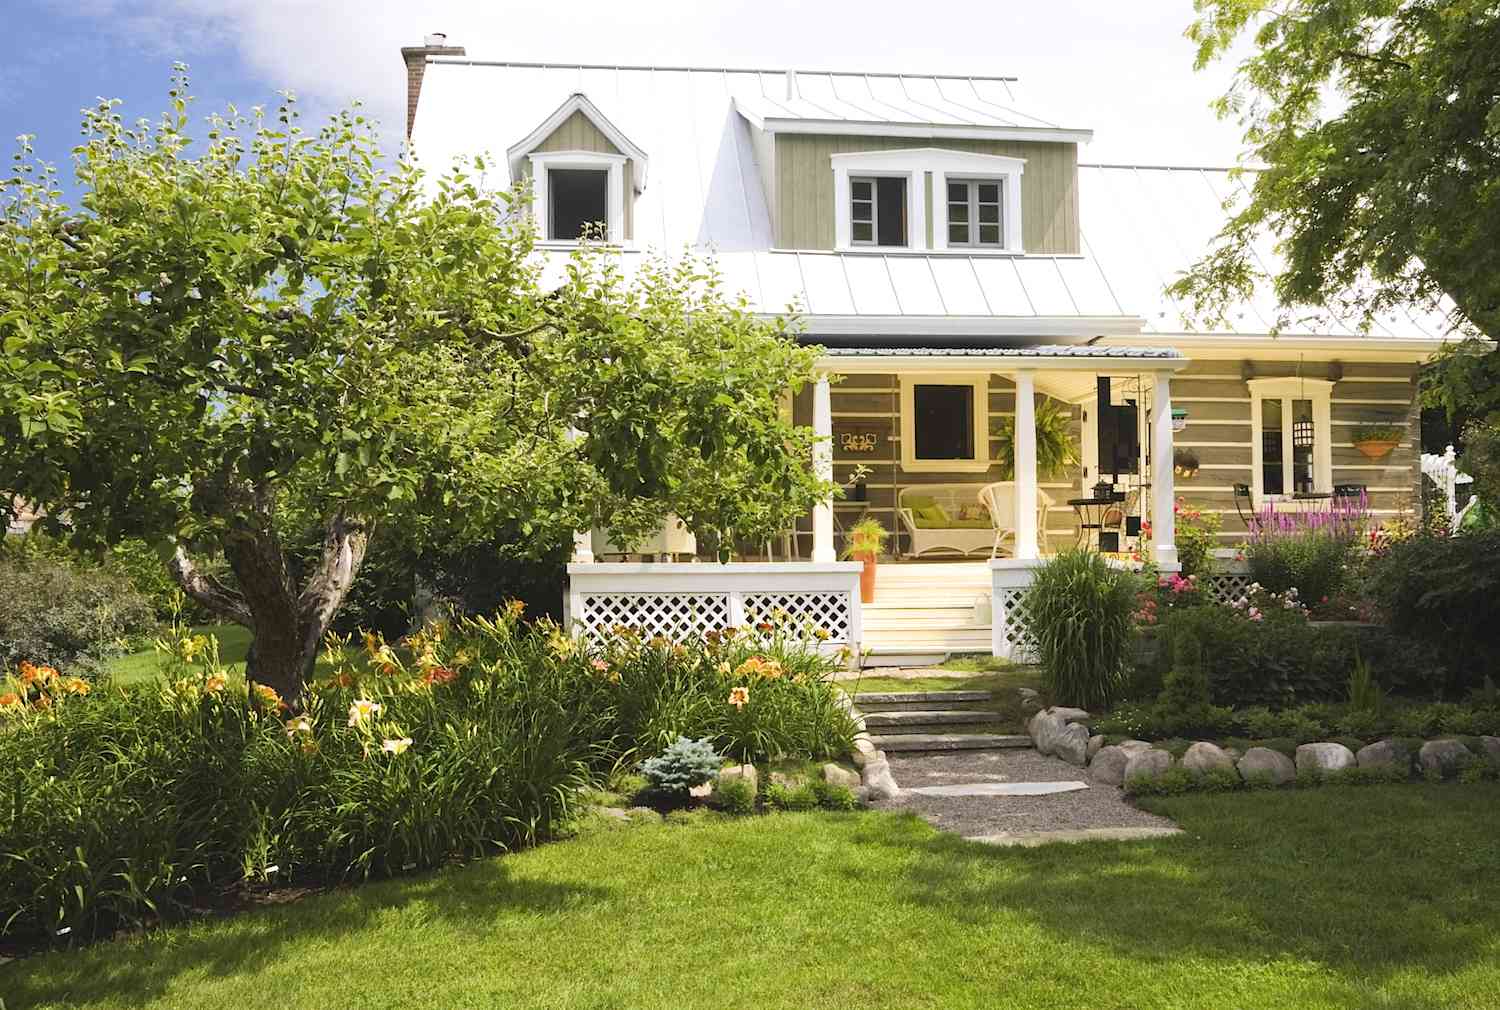 Enticing curb appeal ideas